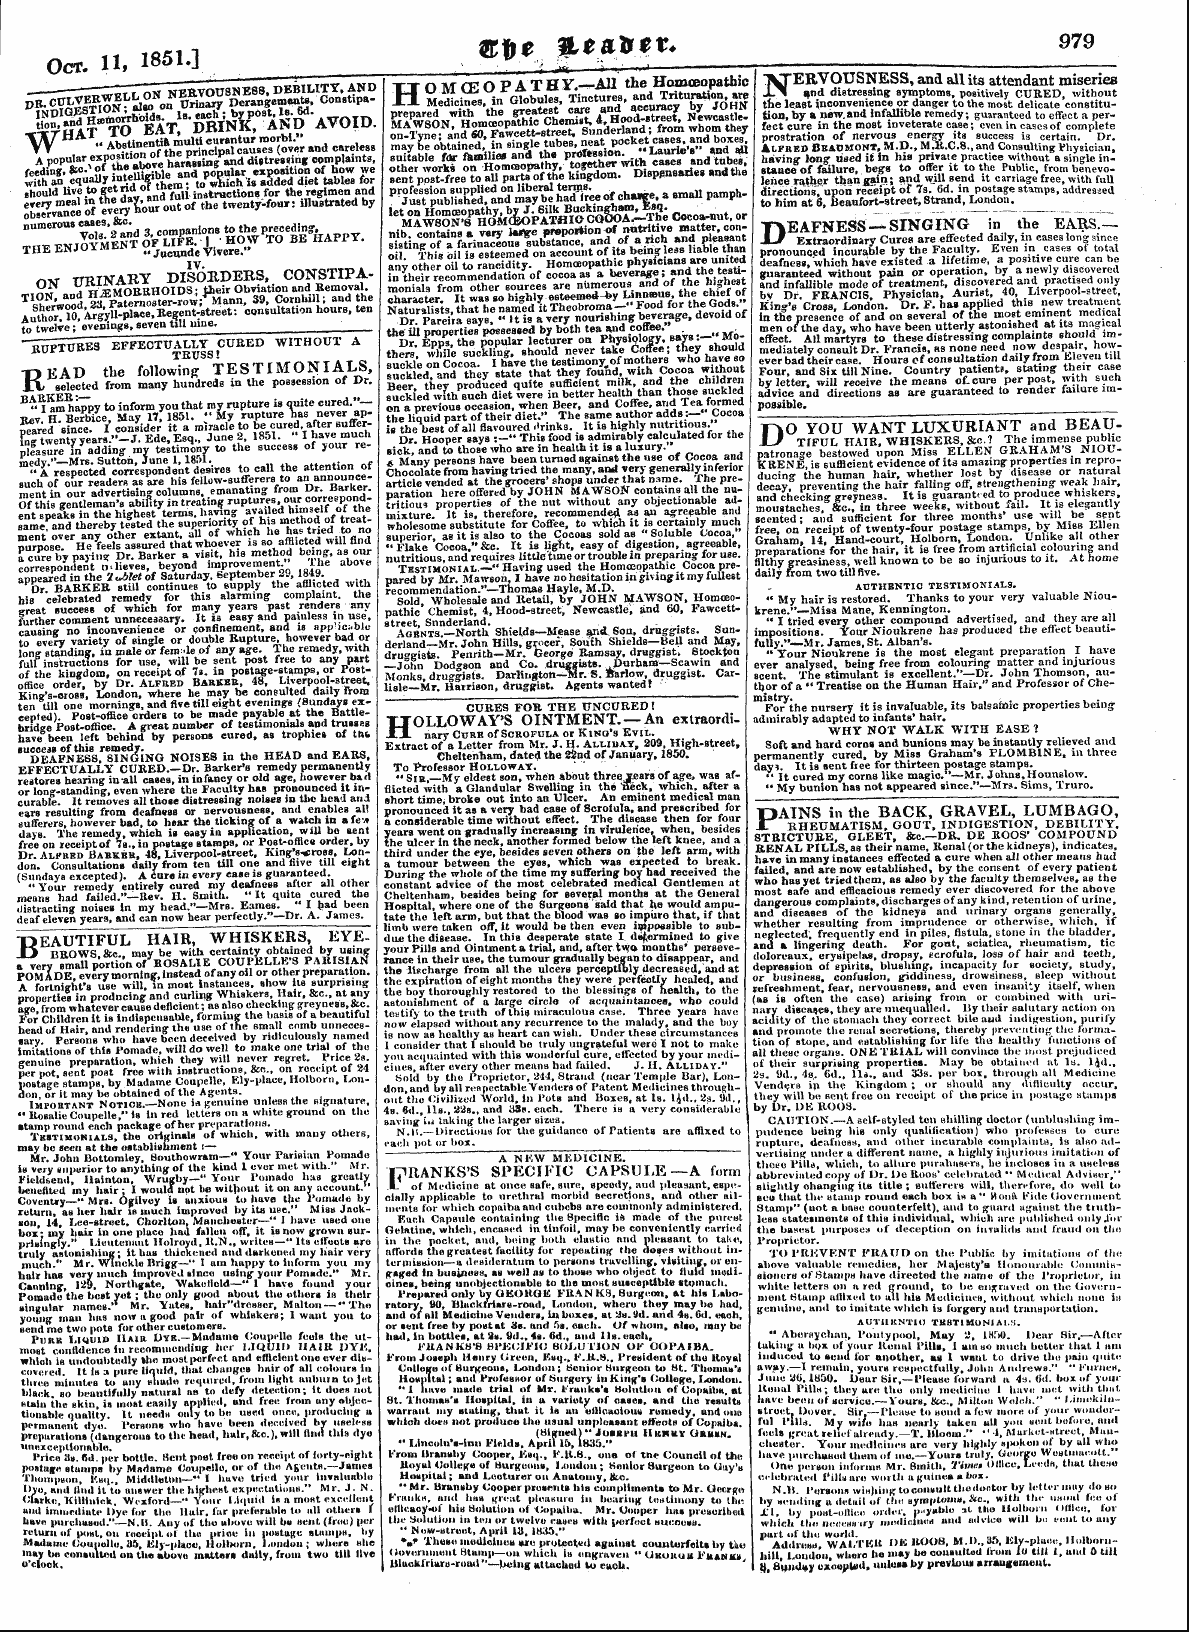 Leader (1850-1860): jS F Y, Country edition - Oct. U, 1851.]